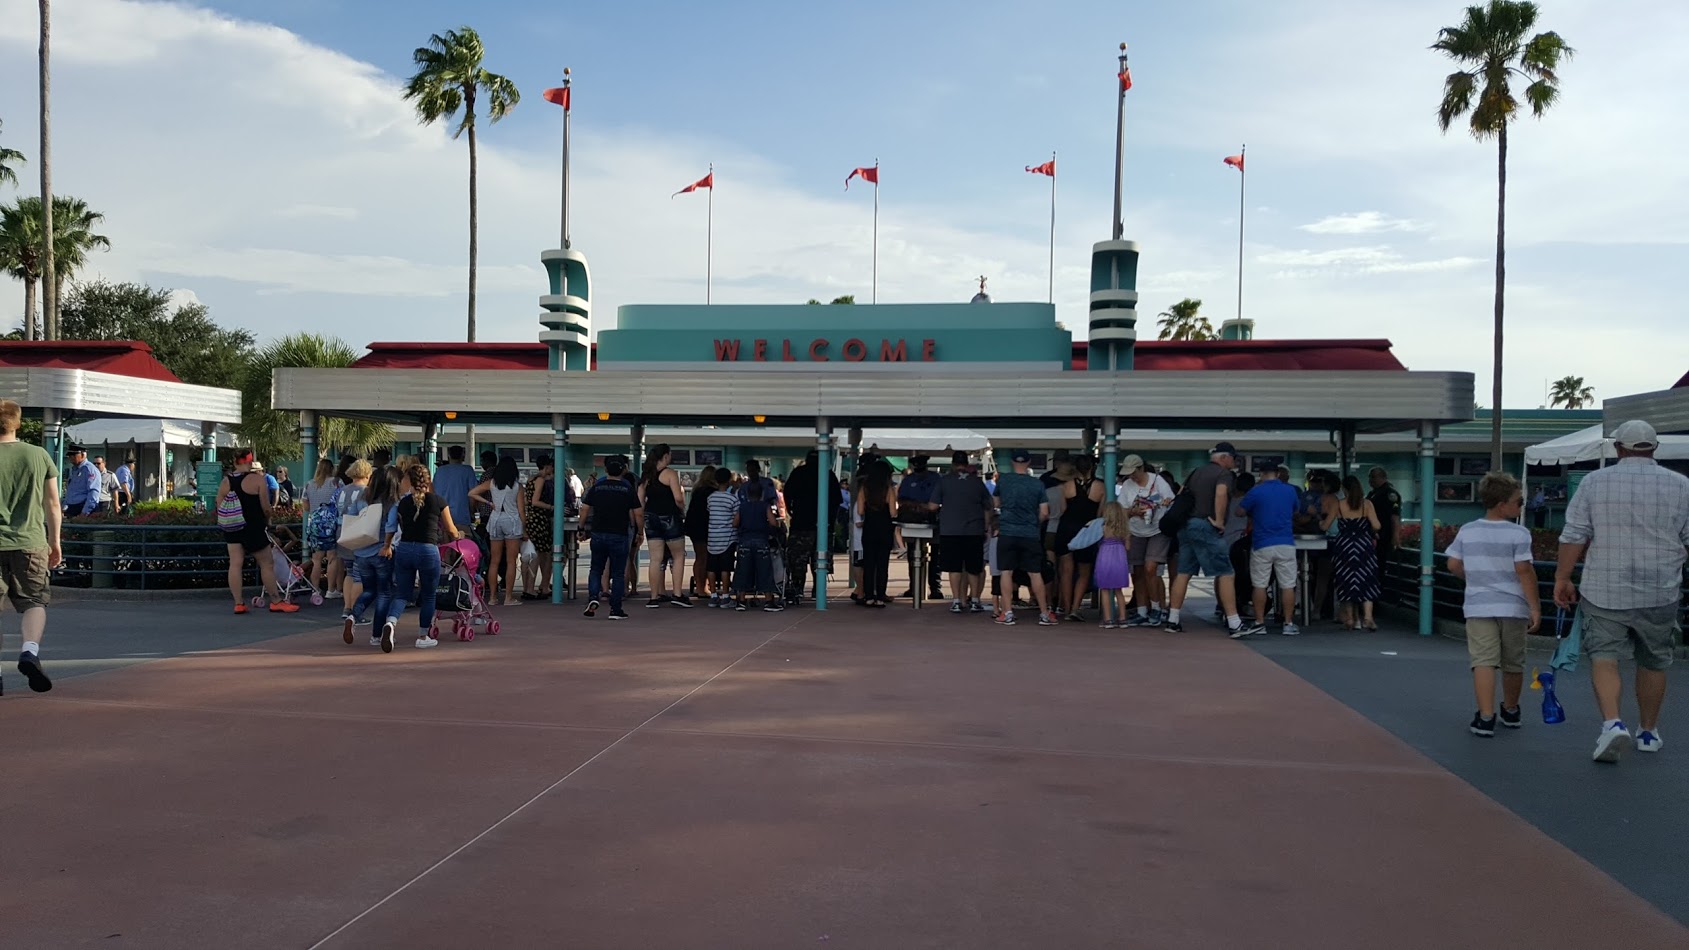 Is Disney scaling back Extra Evening Magic Hours at Hollywood Studios?